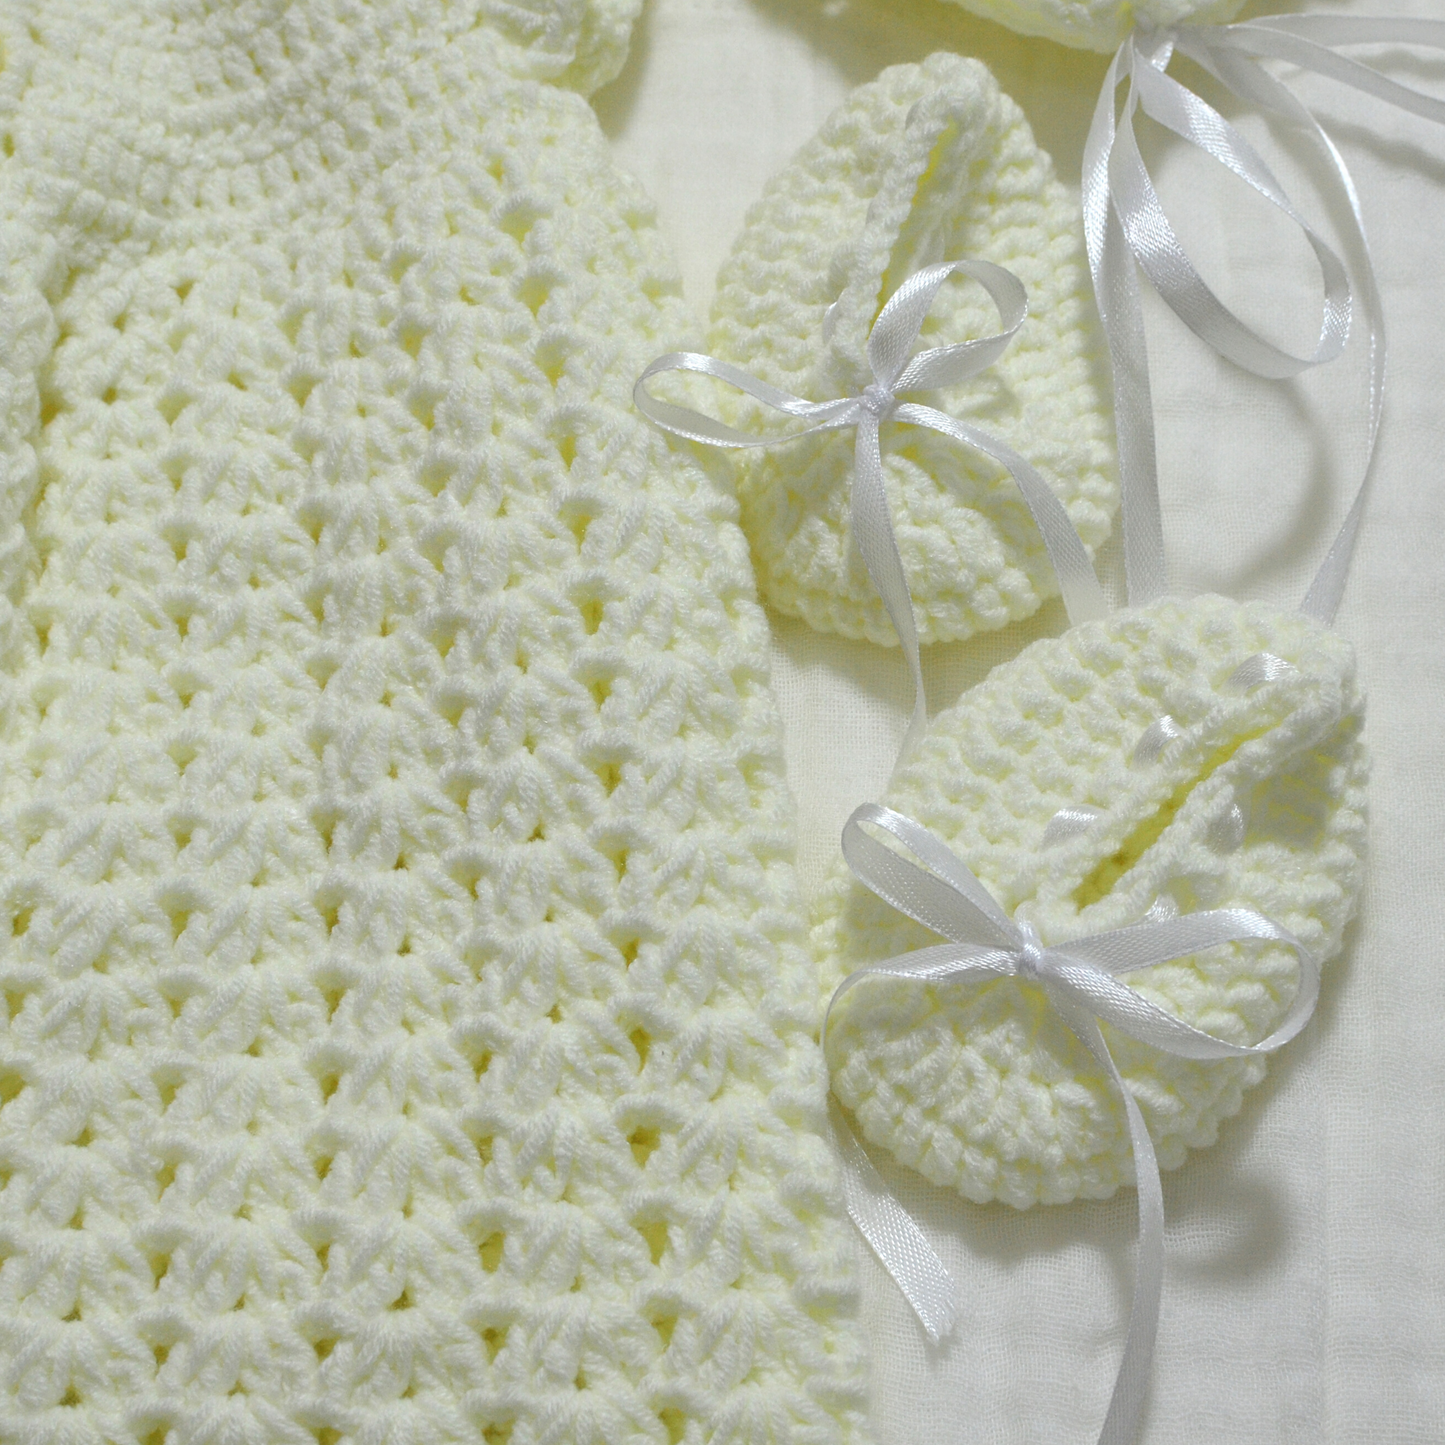 Crochet Baby Dress With Hat and Shoes - Newborn size